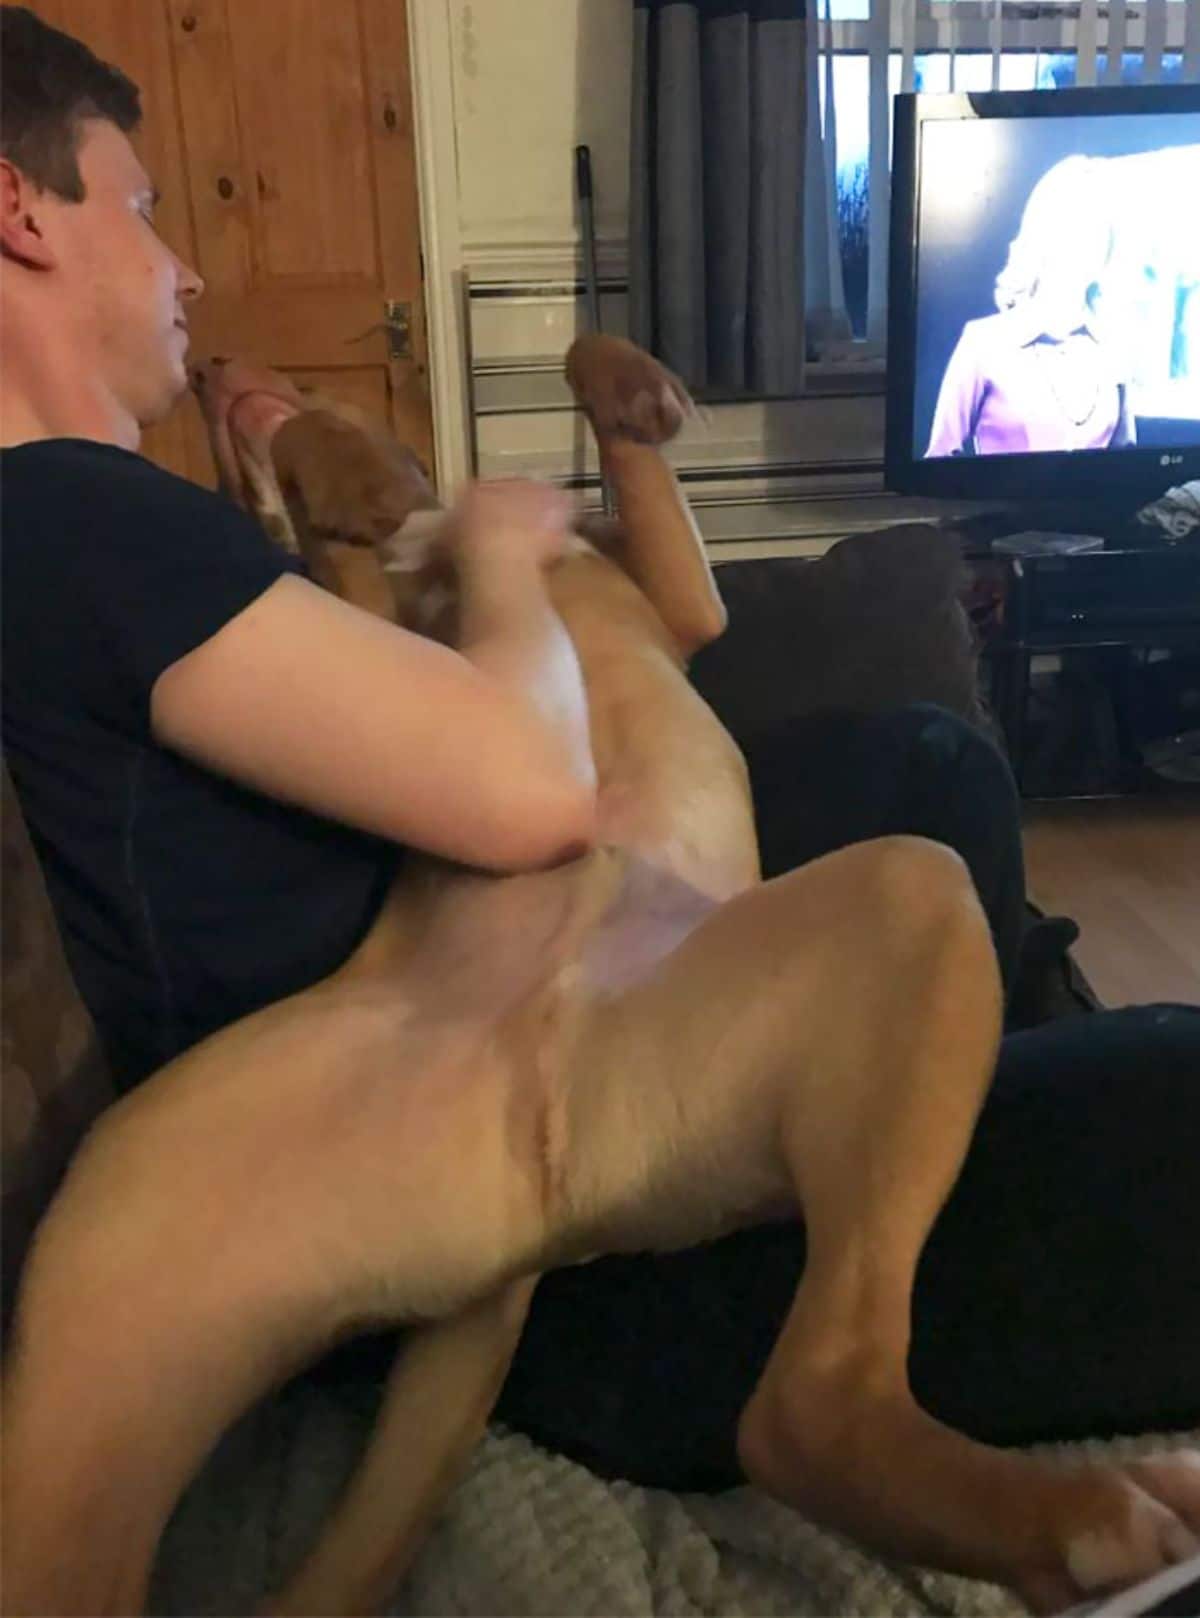 brown dog laying belly up on a man's lap